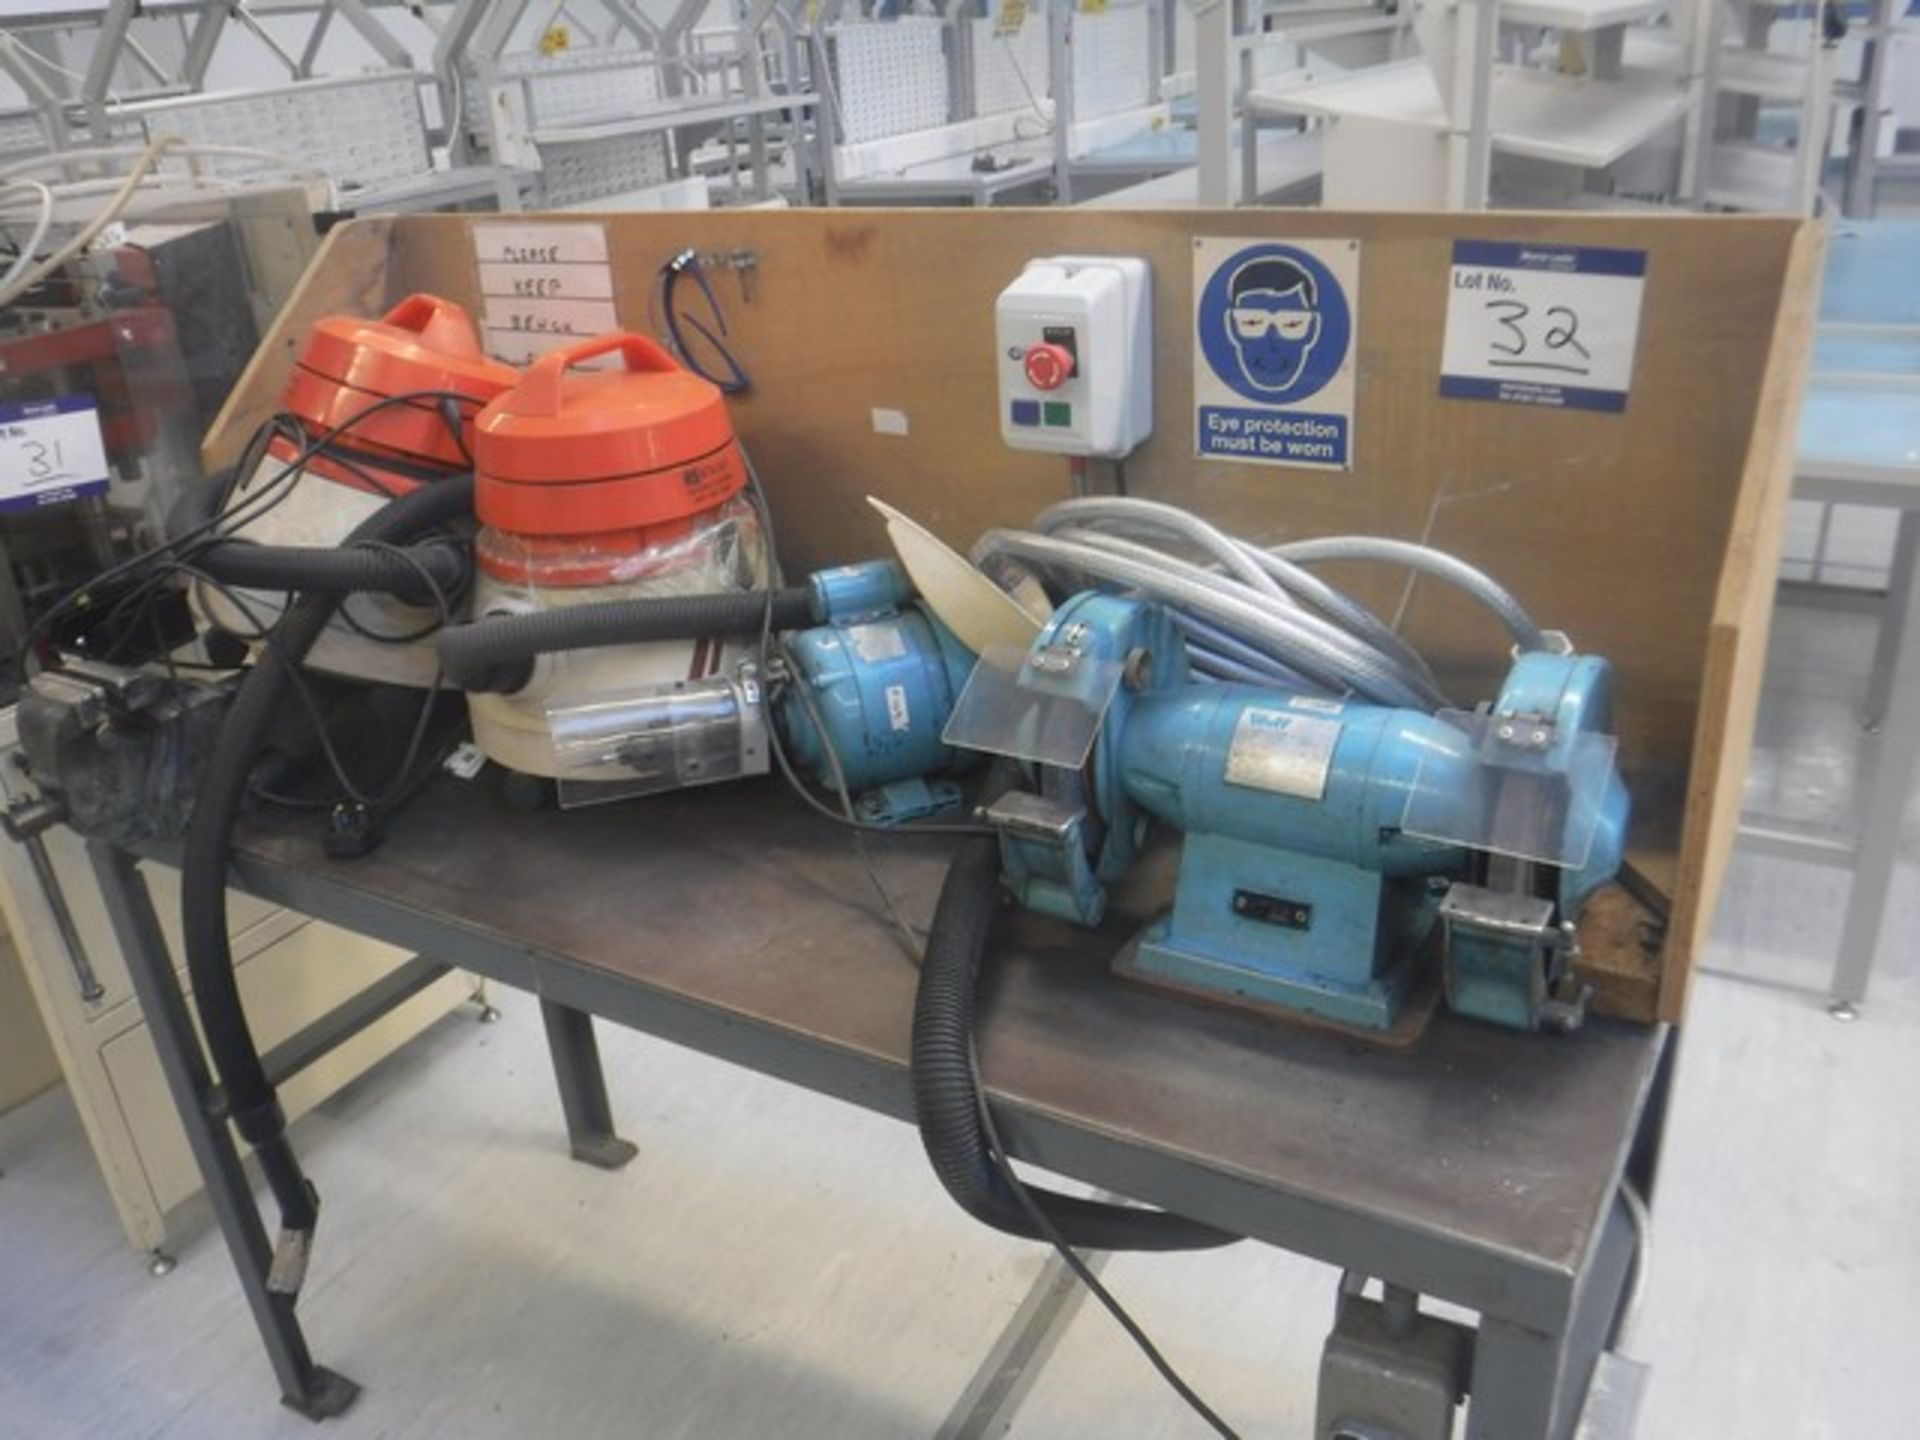 Workbench c/w wolfgrinder, vice, drill and 2 vacuum cleaners - Image 2 of 2